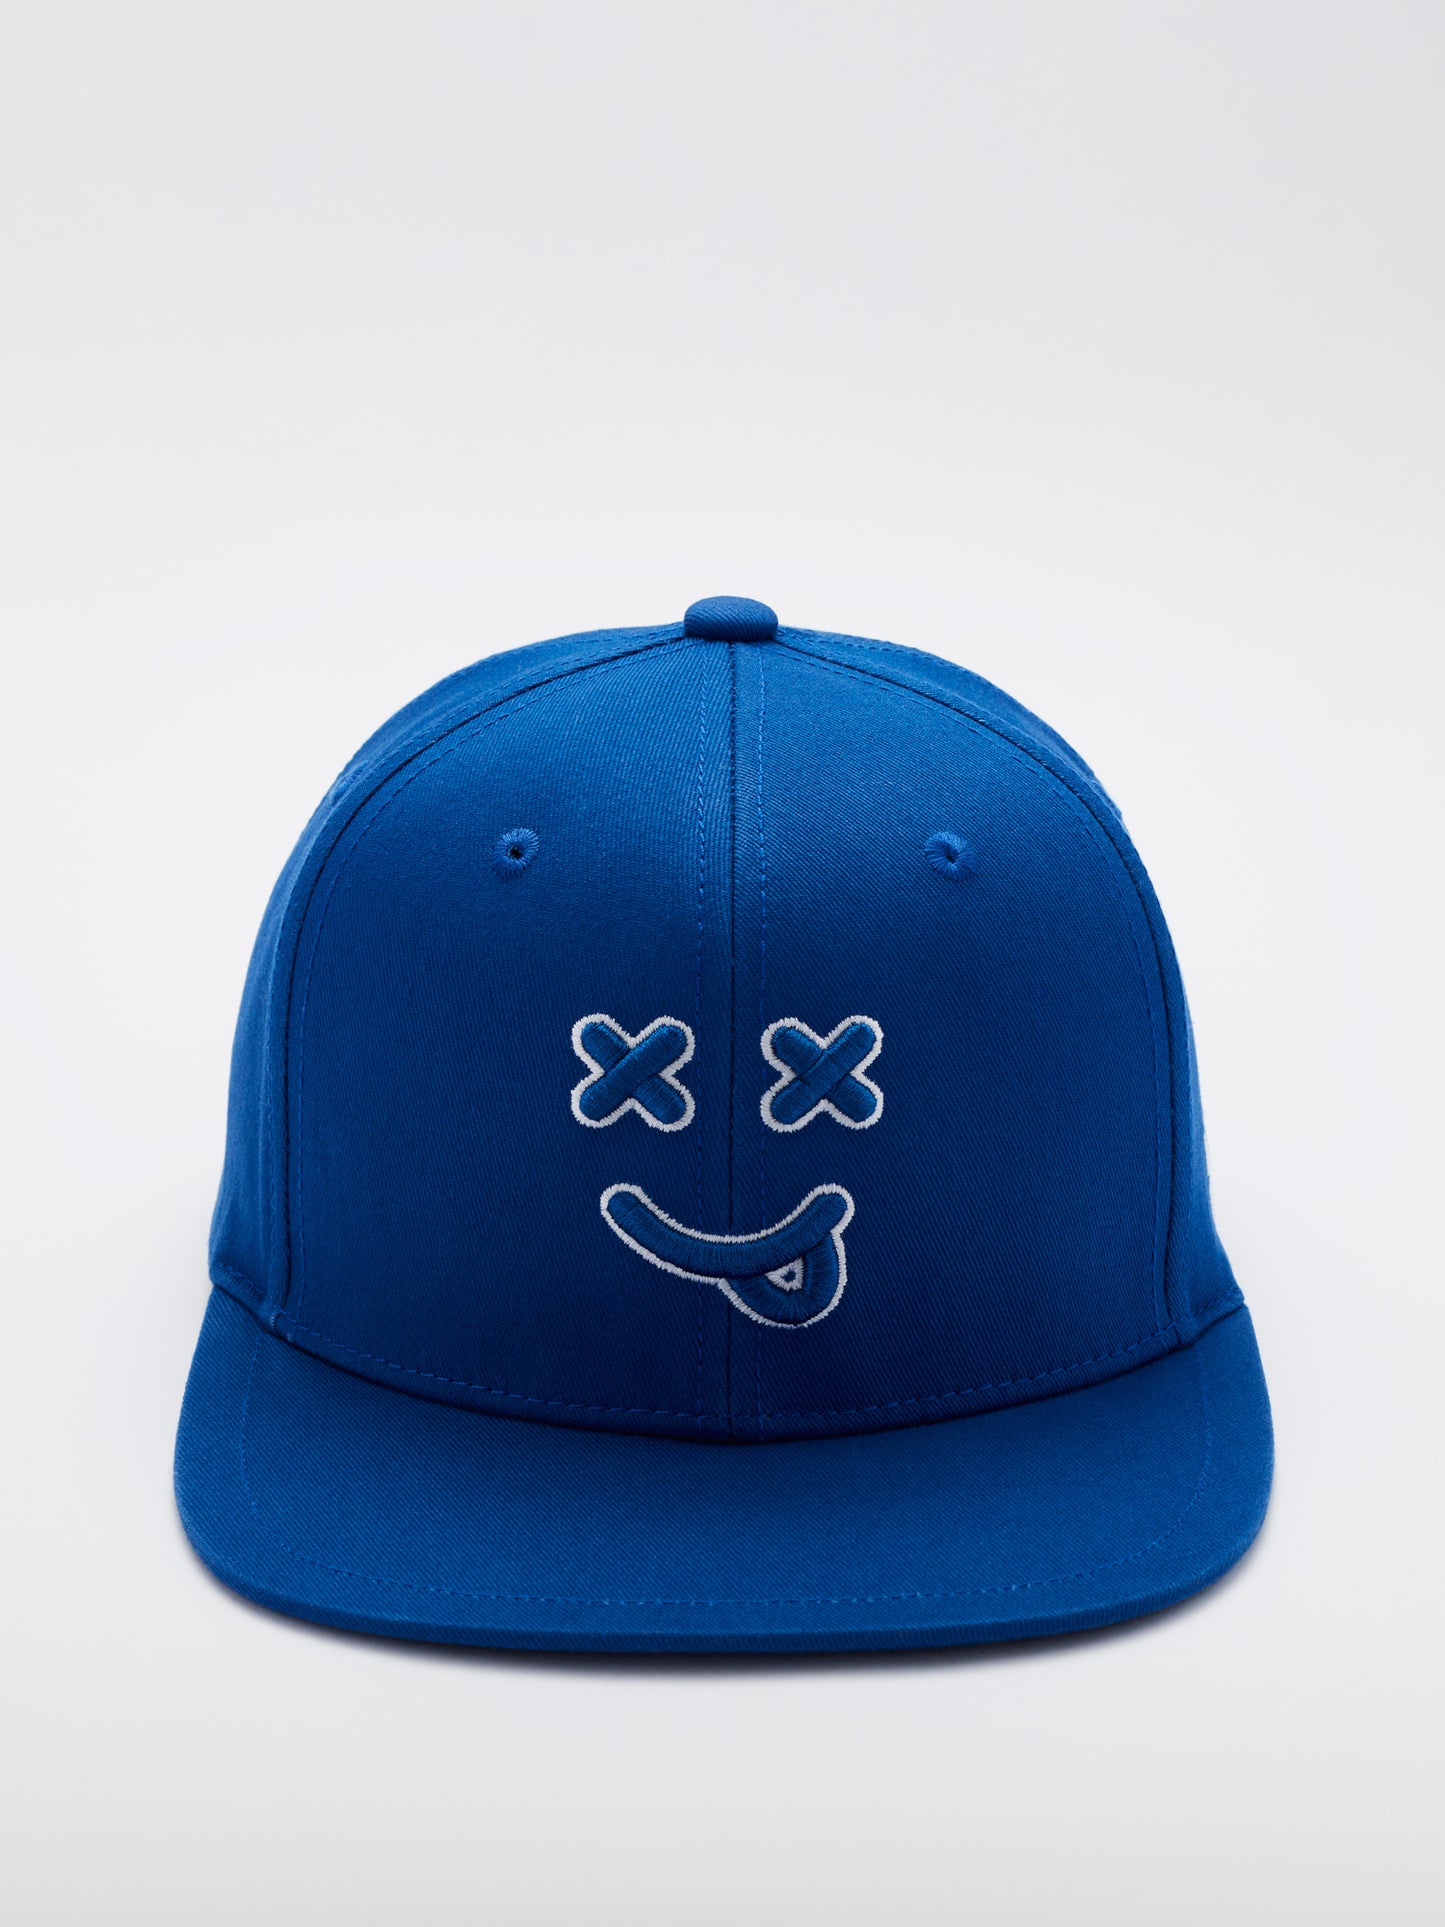 MOOD Caps - XX smiley face baseball cap flat brim front in blue color view